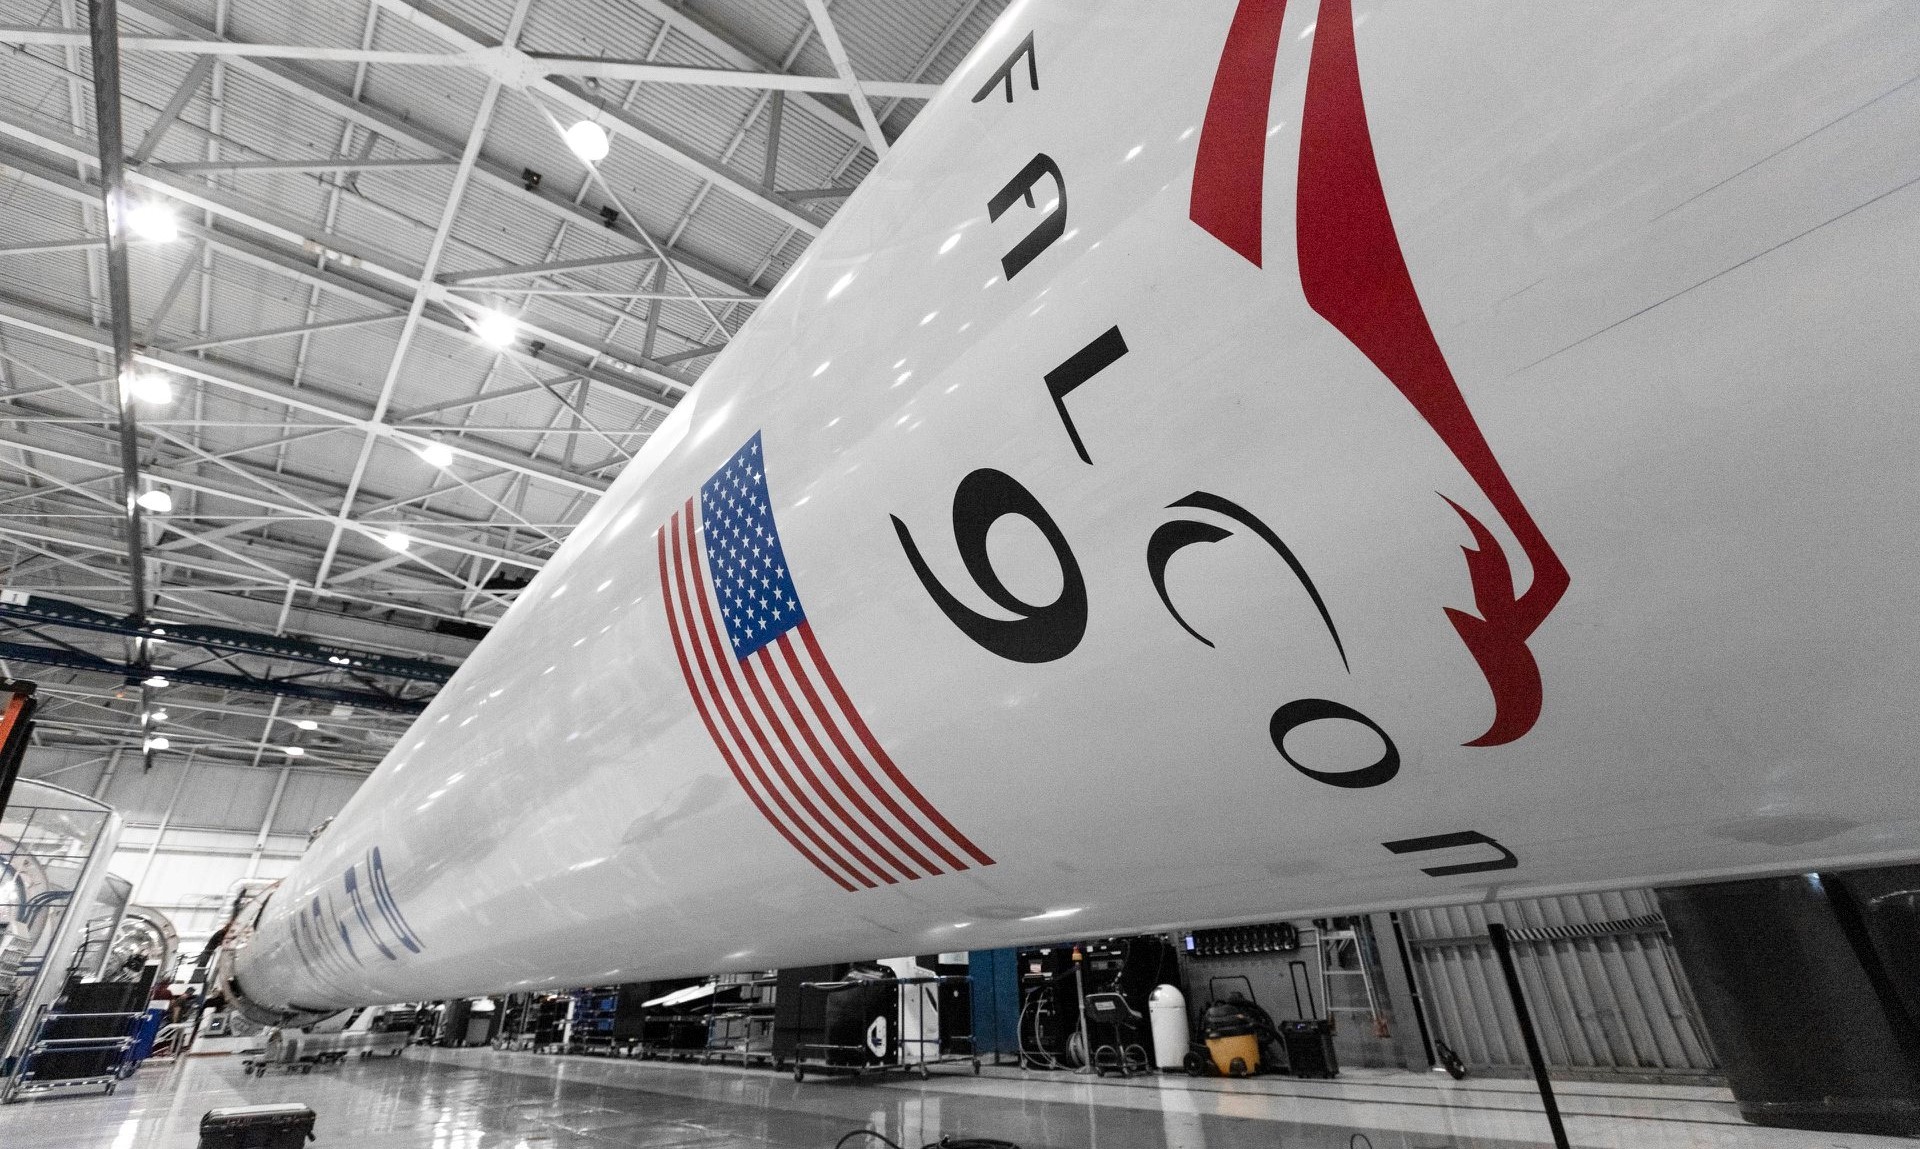 Space Force officials say the Falcon 9 booster pictured here in SpaceX's rocket factory will have to wait a few months longer for its launch debut. (SpaceX)